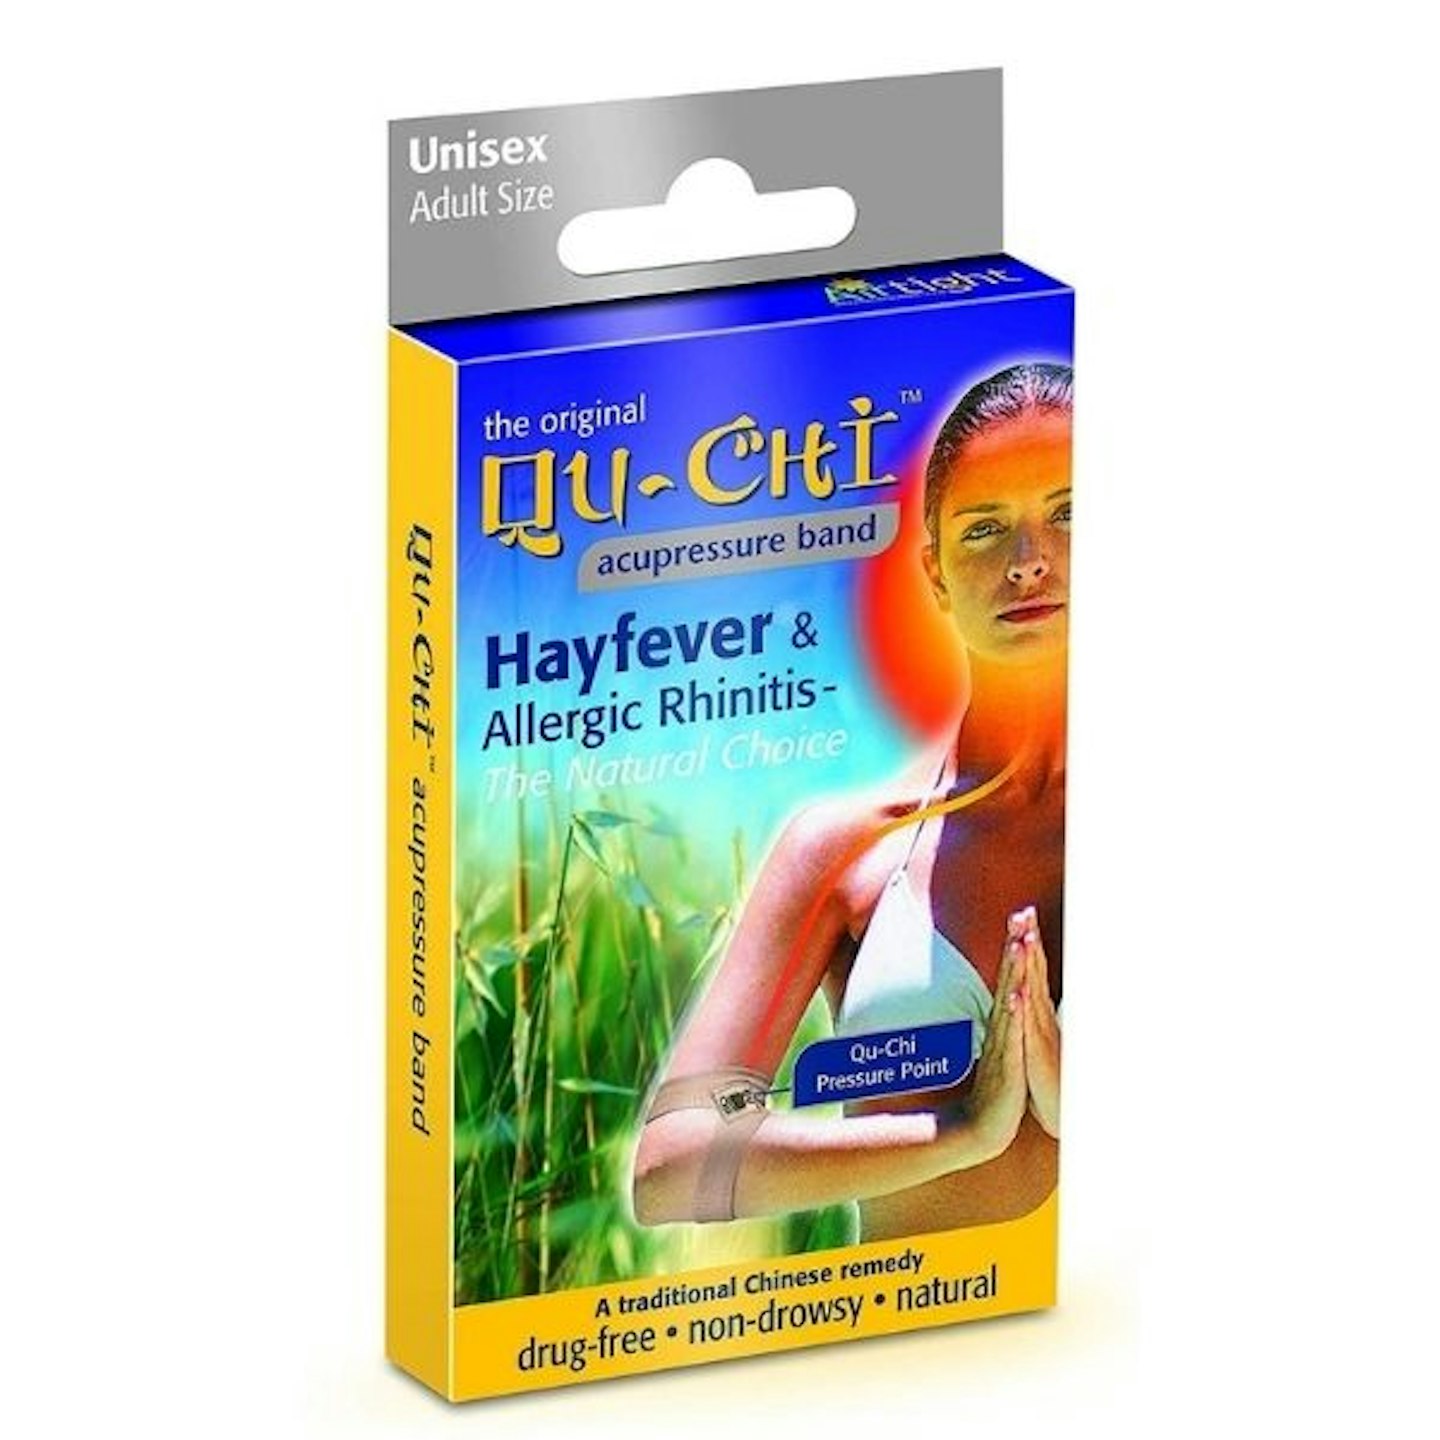 Qu-Chi Hayfever Band - The Acupressure Arm Band